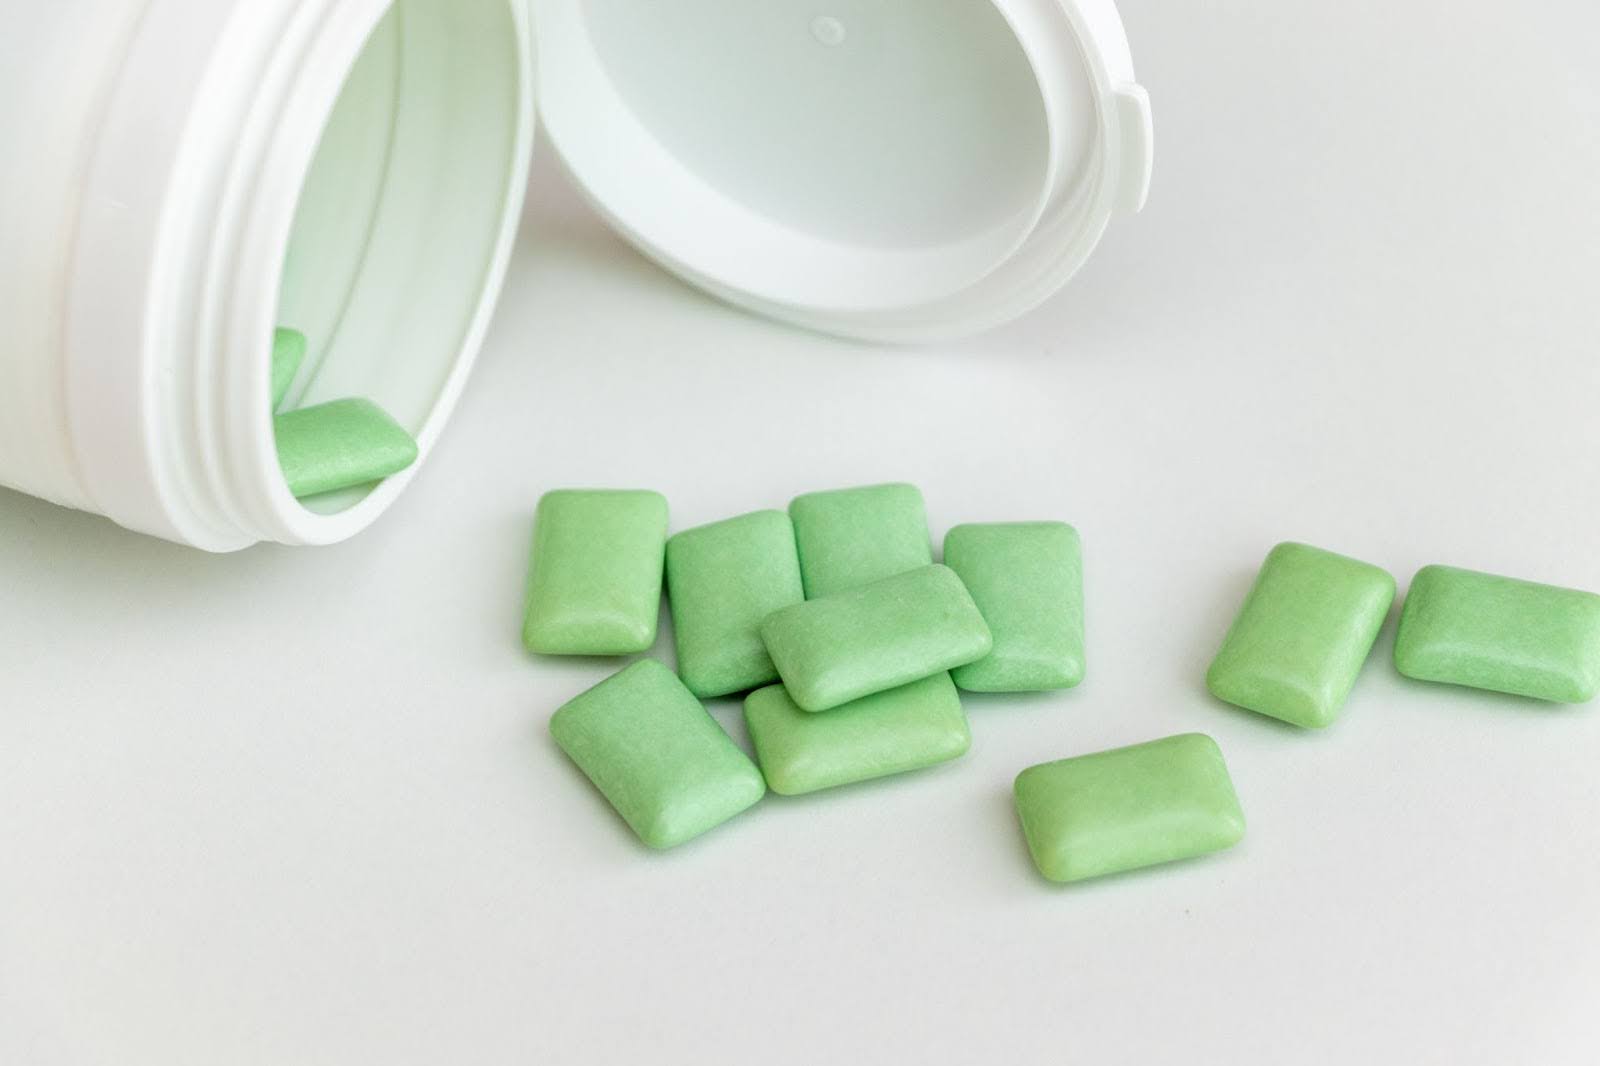 Does Xylitol gums prevent cavities